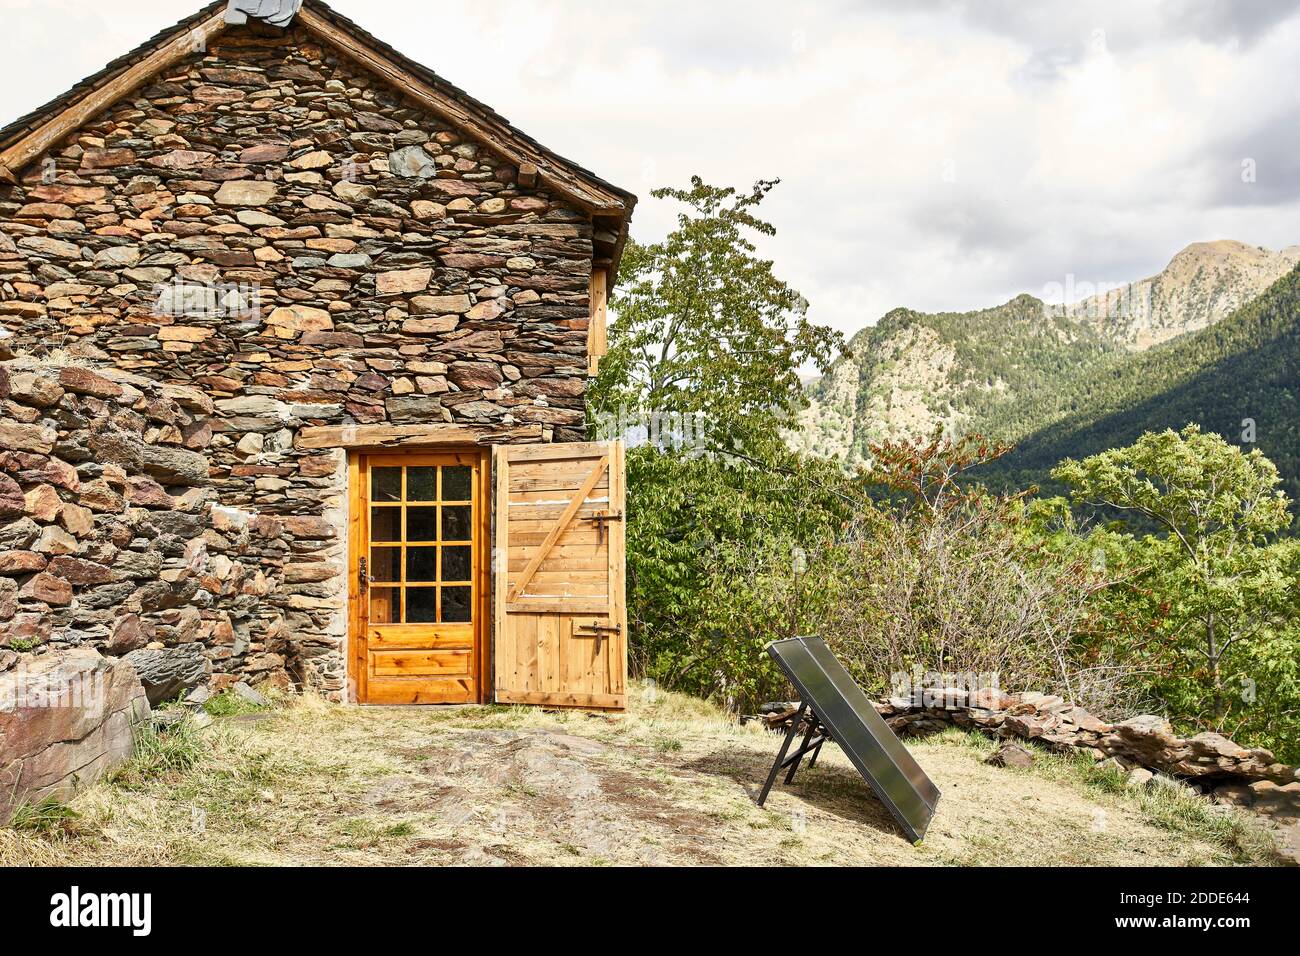 Old traditional house in between mountains Stock Photo